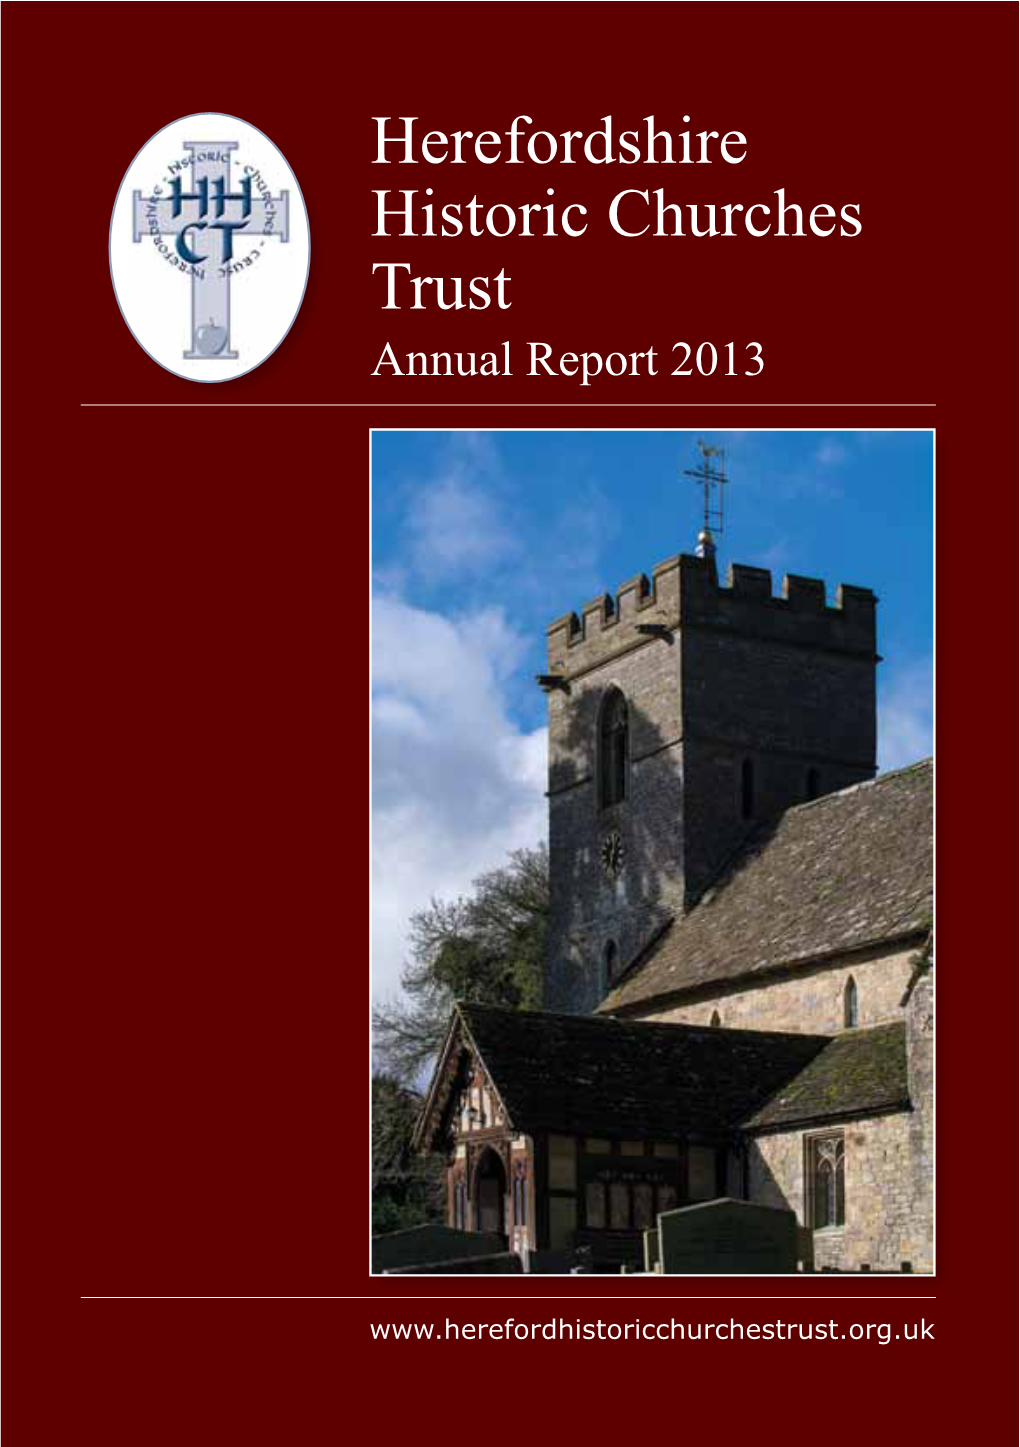 Herefordshire Historic Churches Trust Annual Report 2013